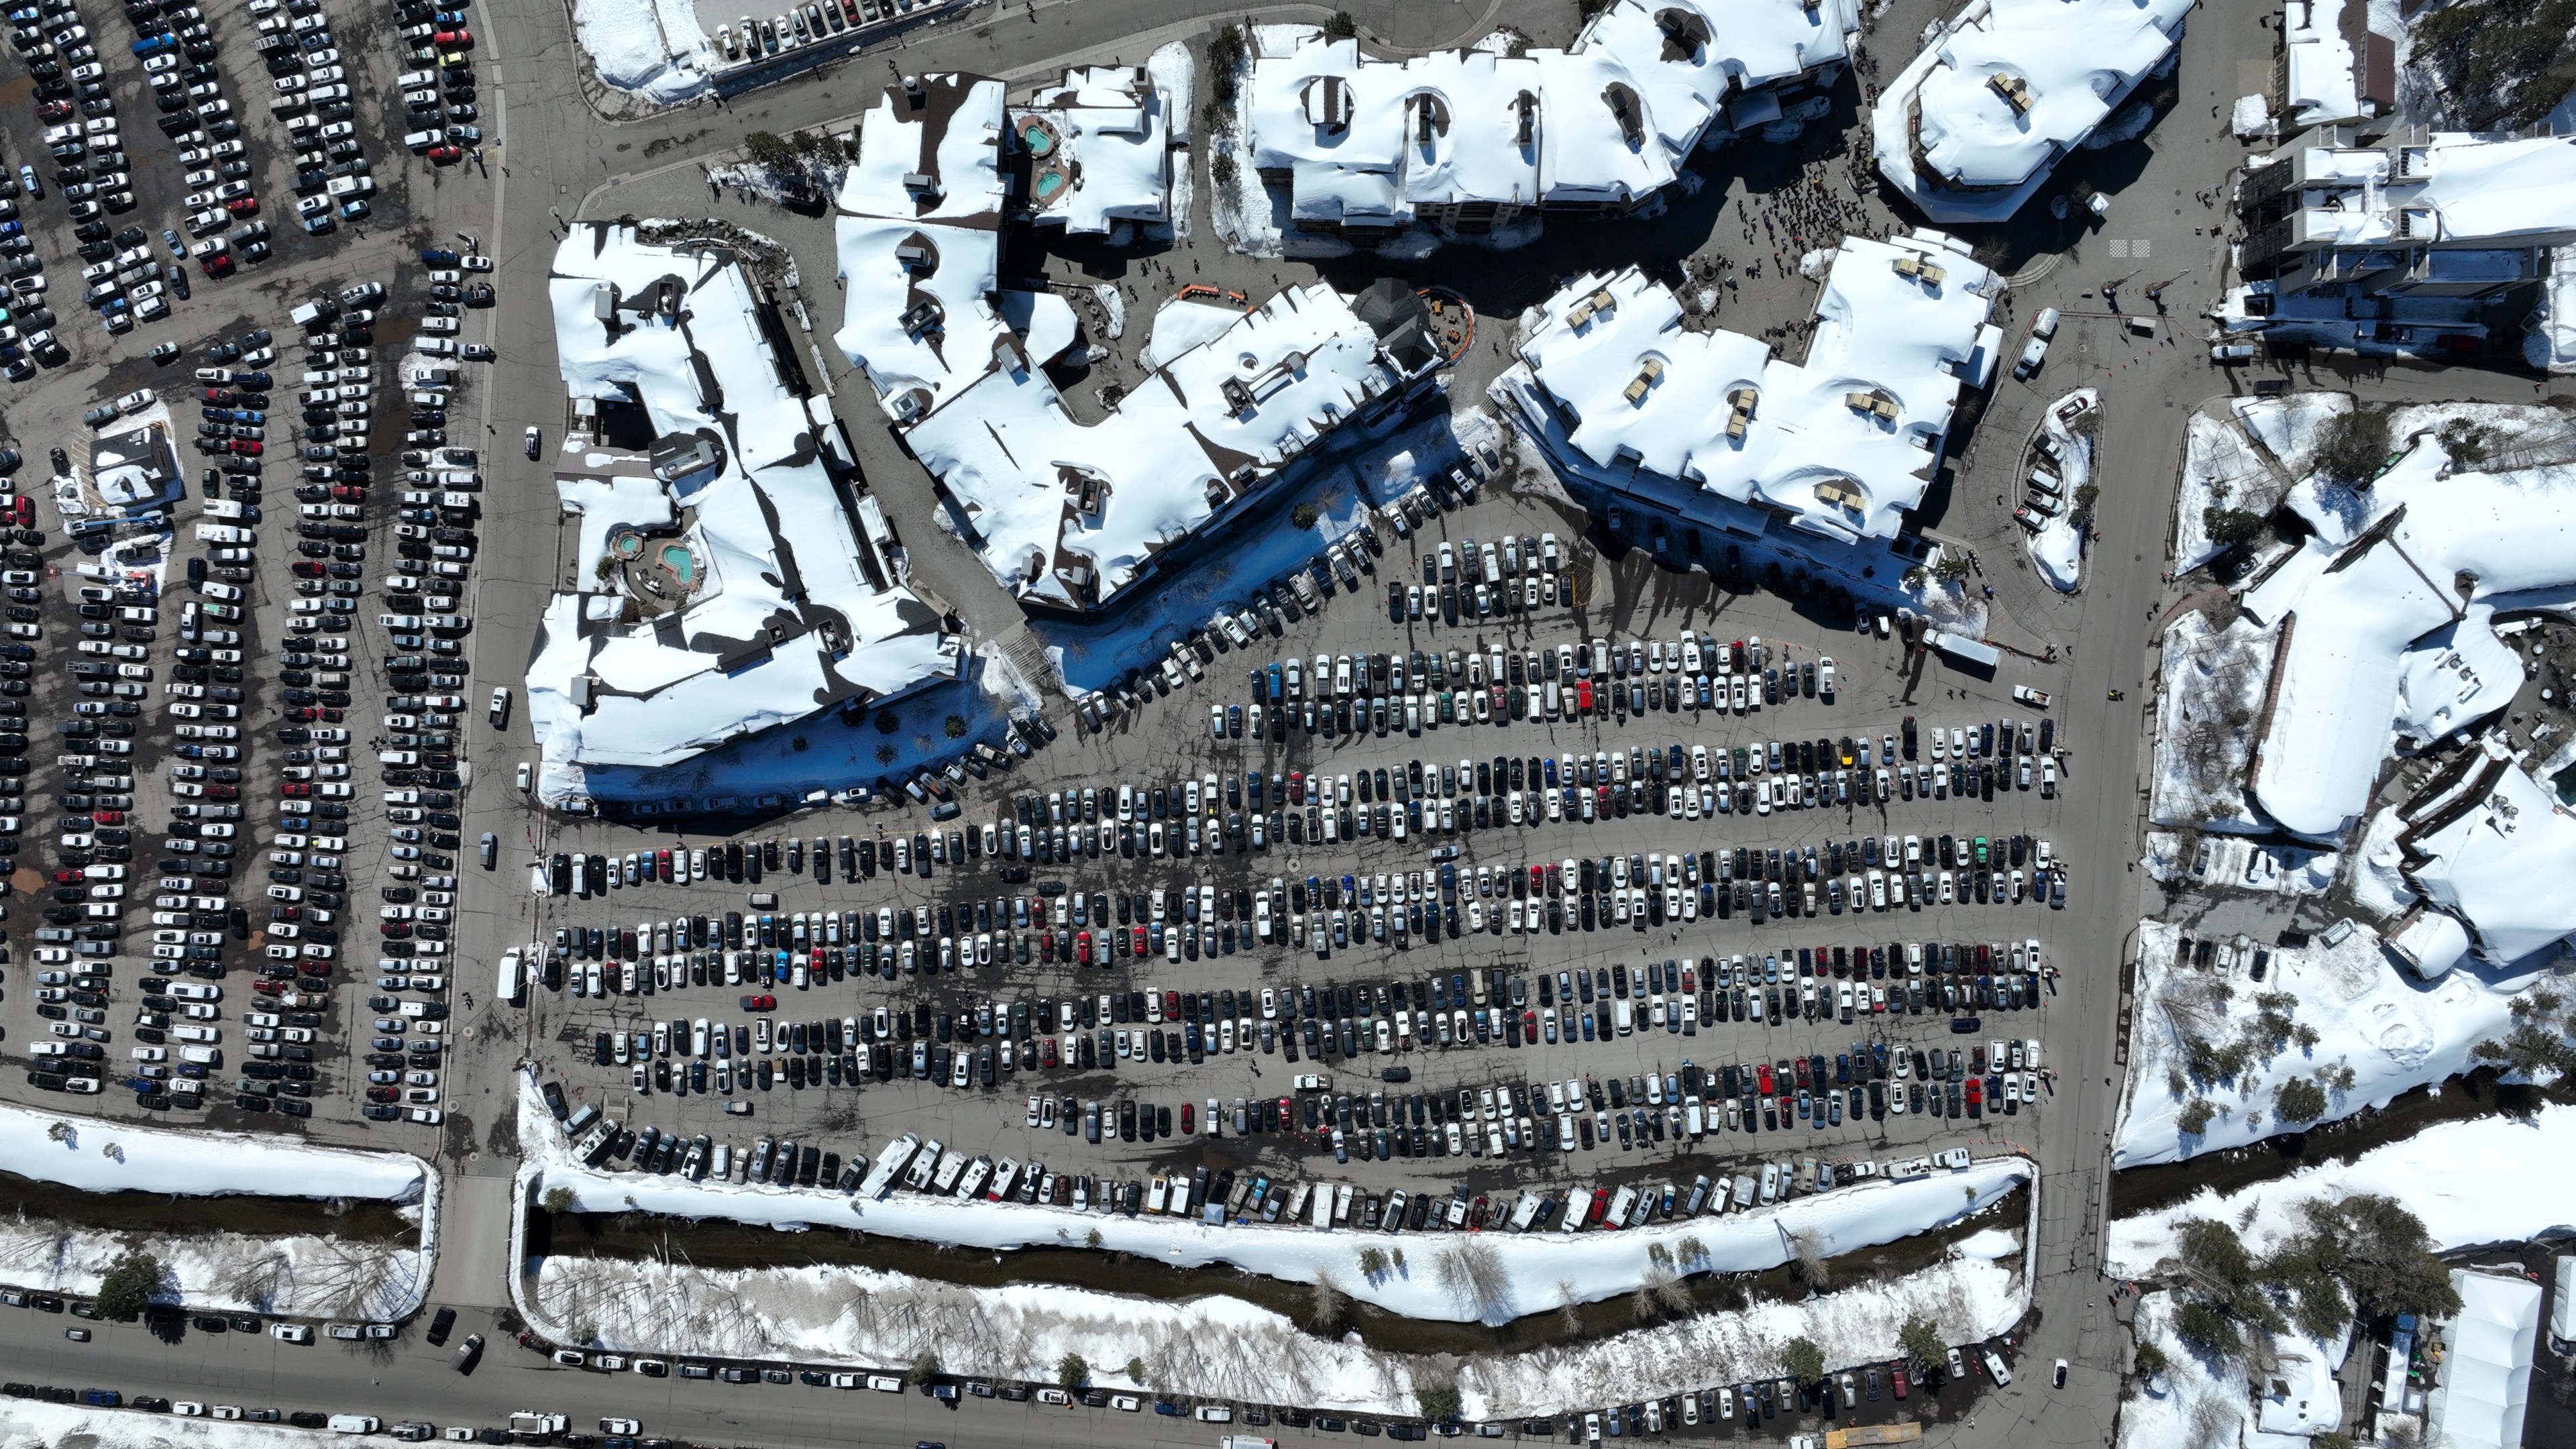 One of the Palisades Tahoe parking lots that will be requiring visitors to register for parking prior to visiting the resort. The Palisades is the largest ski resort in the Lake Tahoe area.